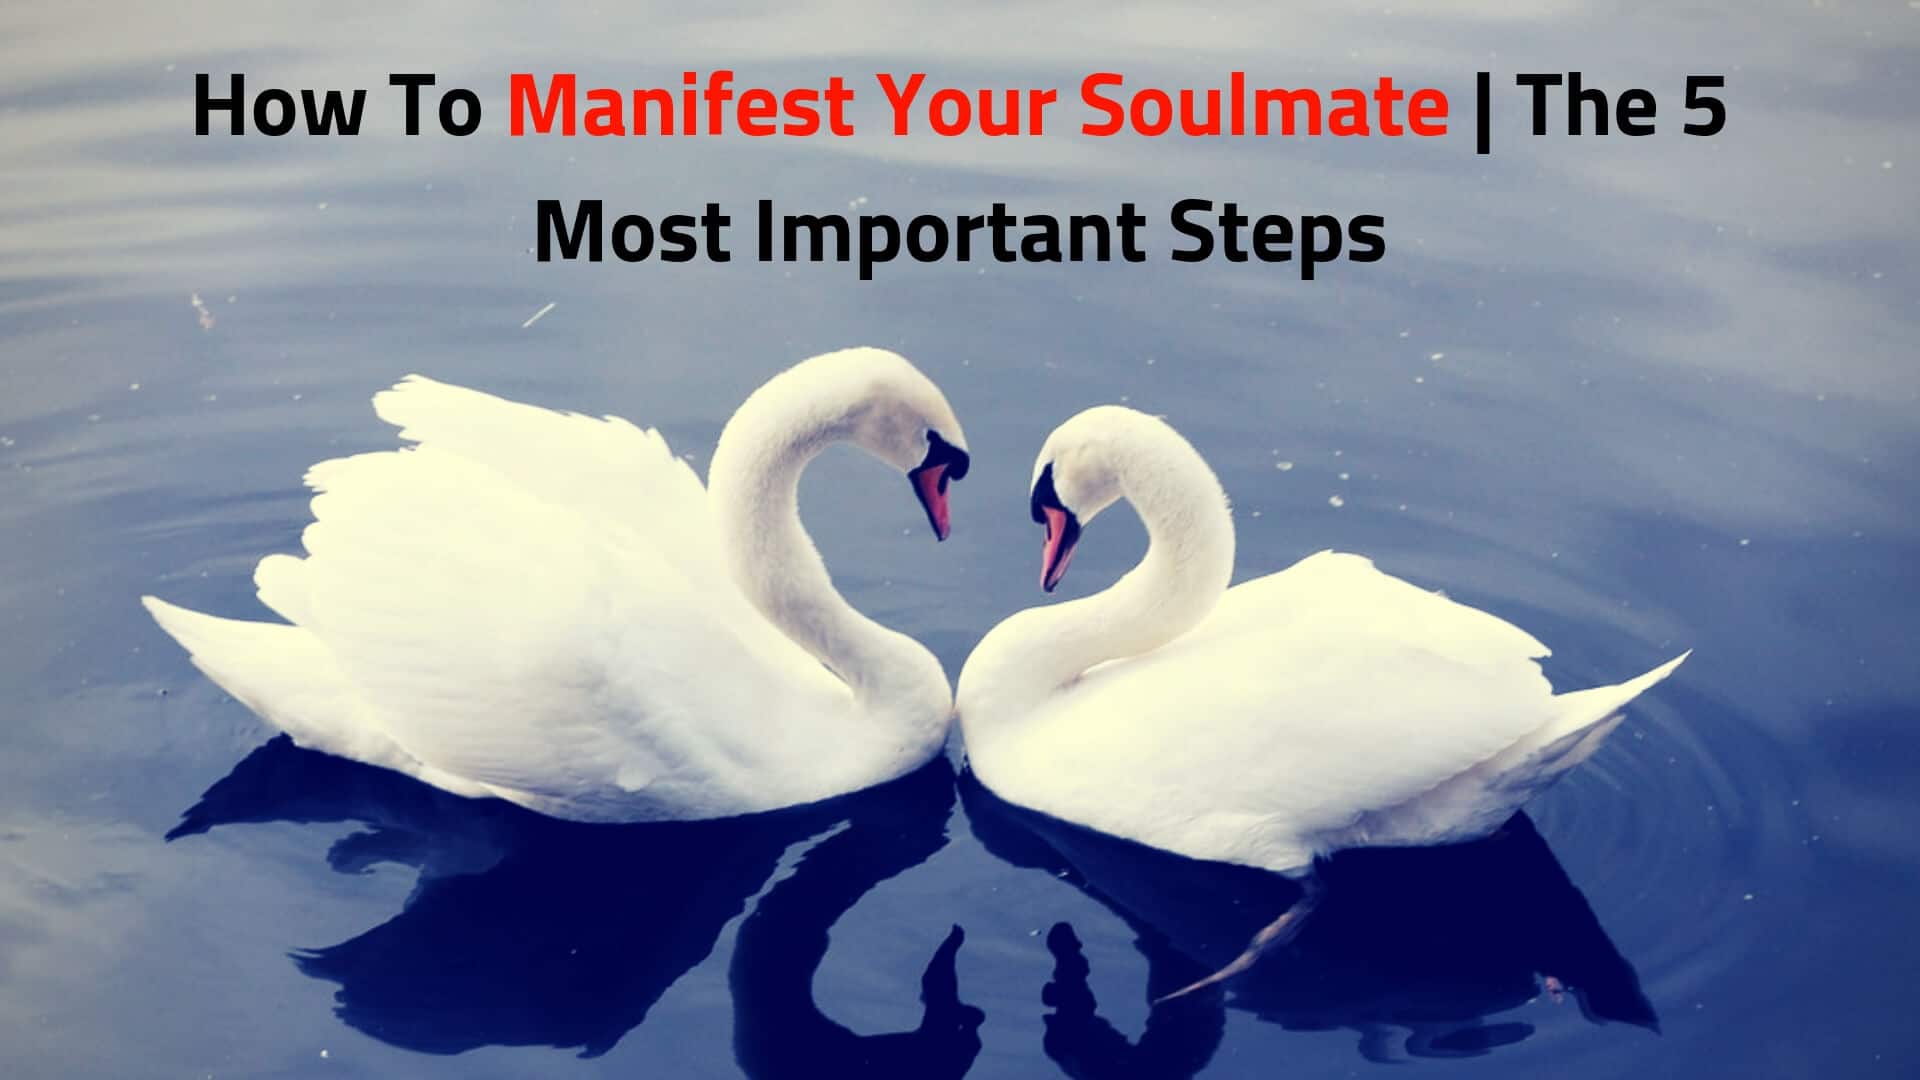 How to meet your soulmate